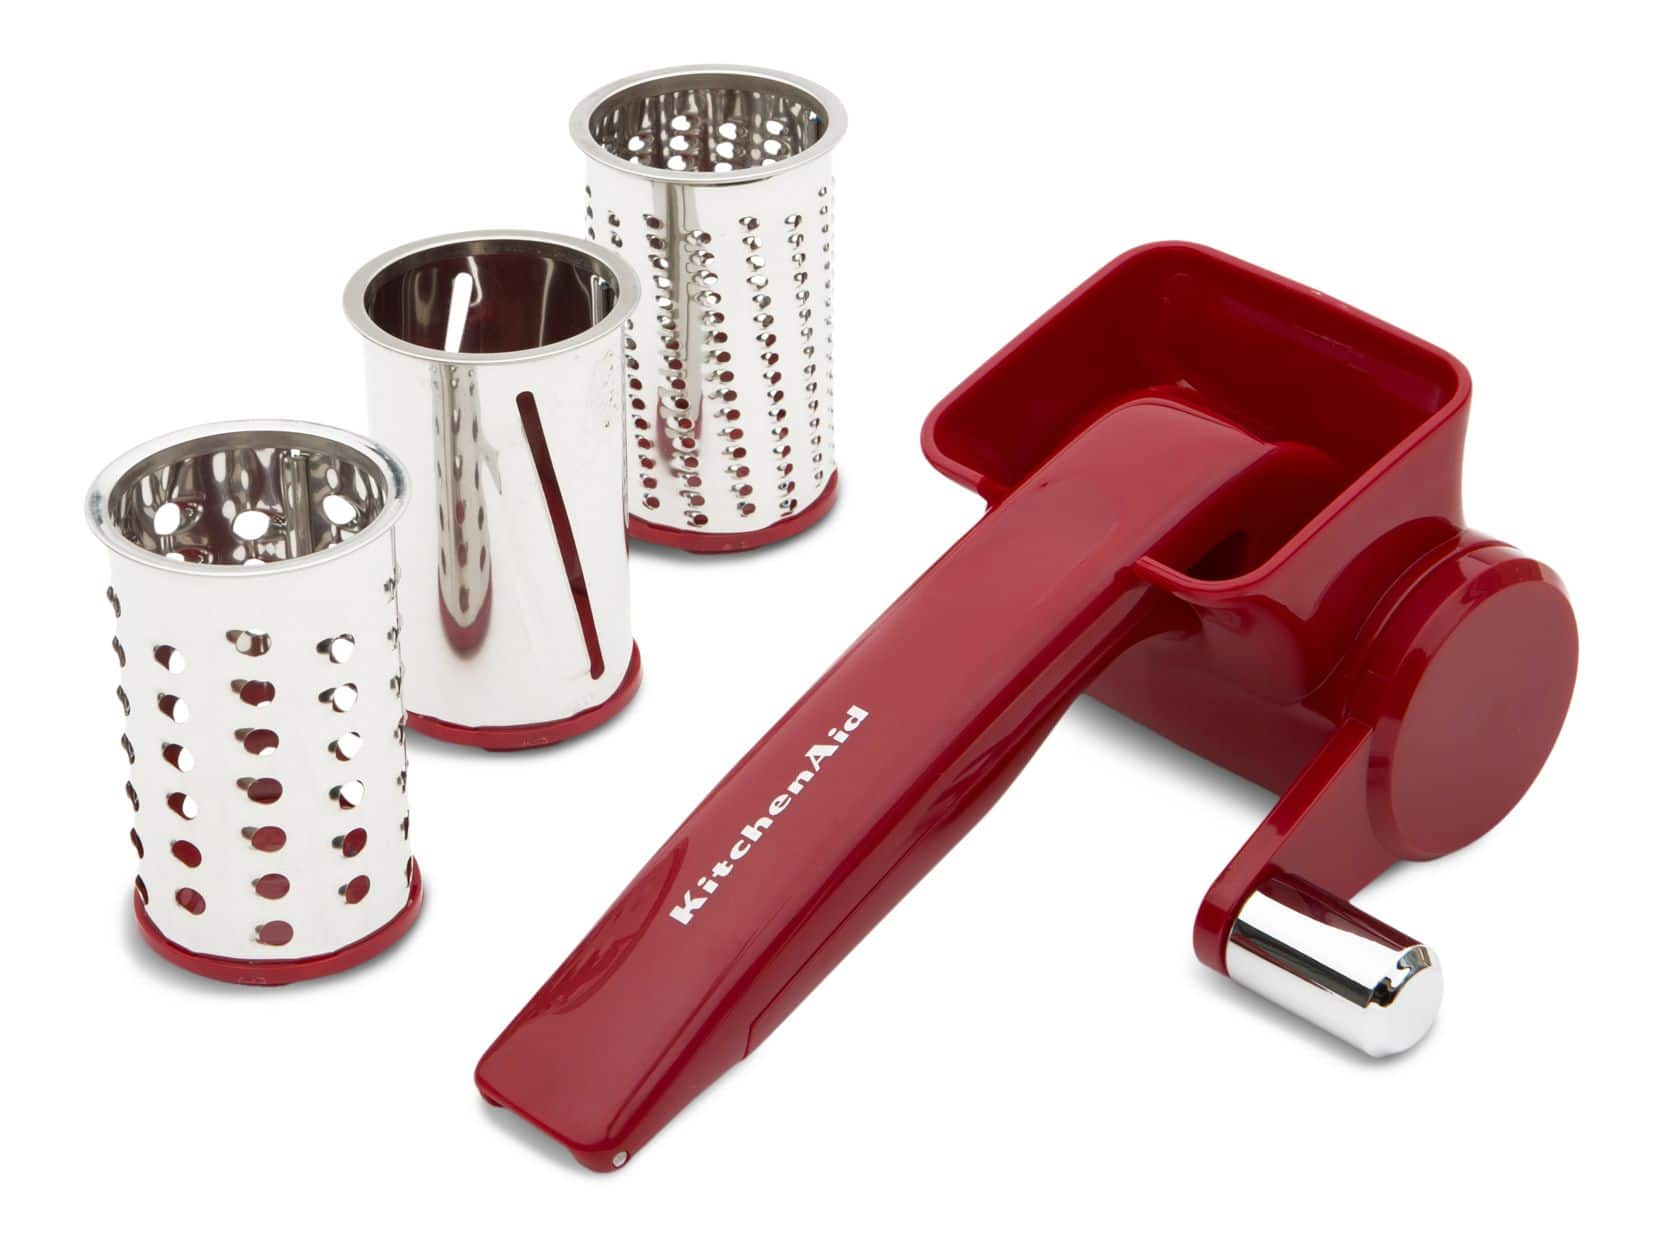 https://media-www.canadiantire.ca/product/living/kitchen/kitchen-tools-thermometers/1424254/kitchen-aid-rotary-grater-red-4b42623b-93a4-4467-8633-fef84ede737c-jpgrendition.jpg